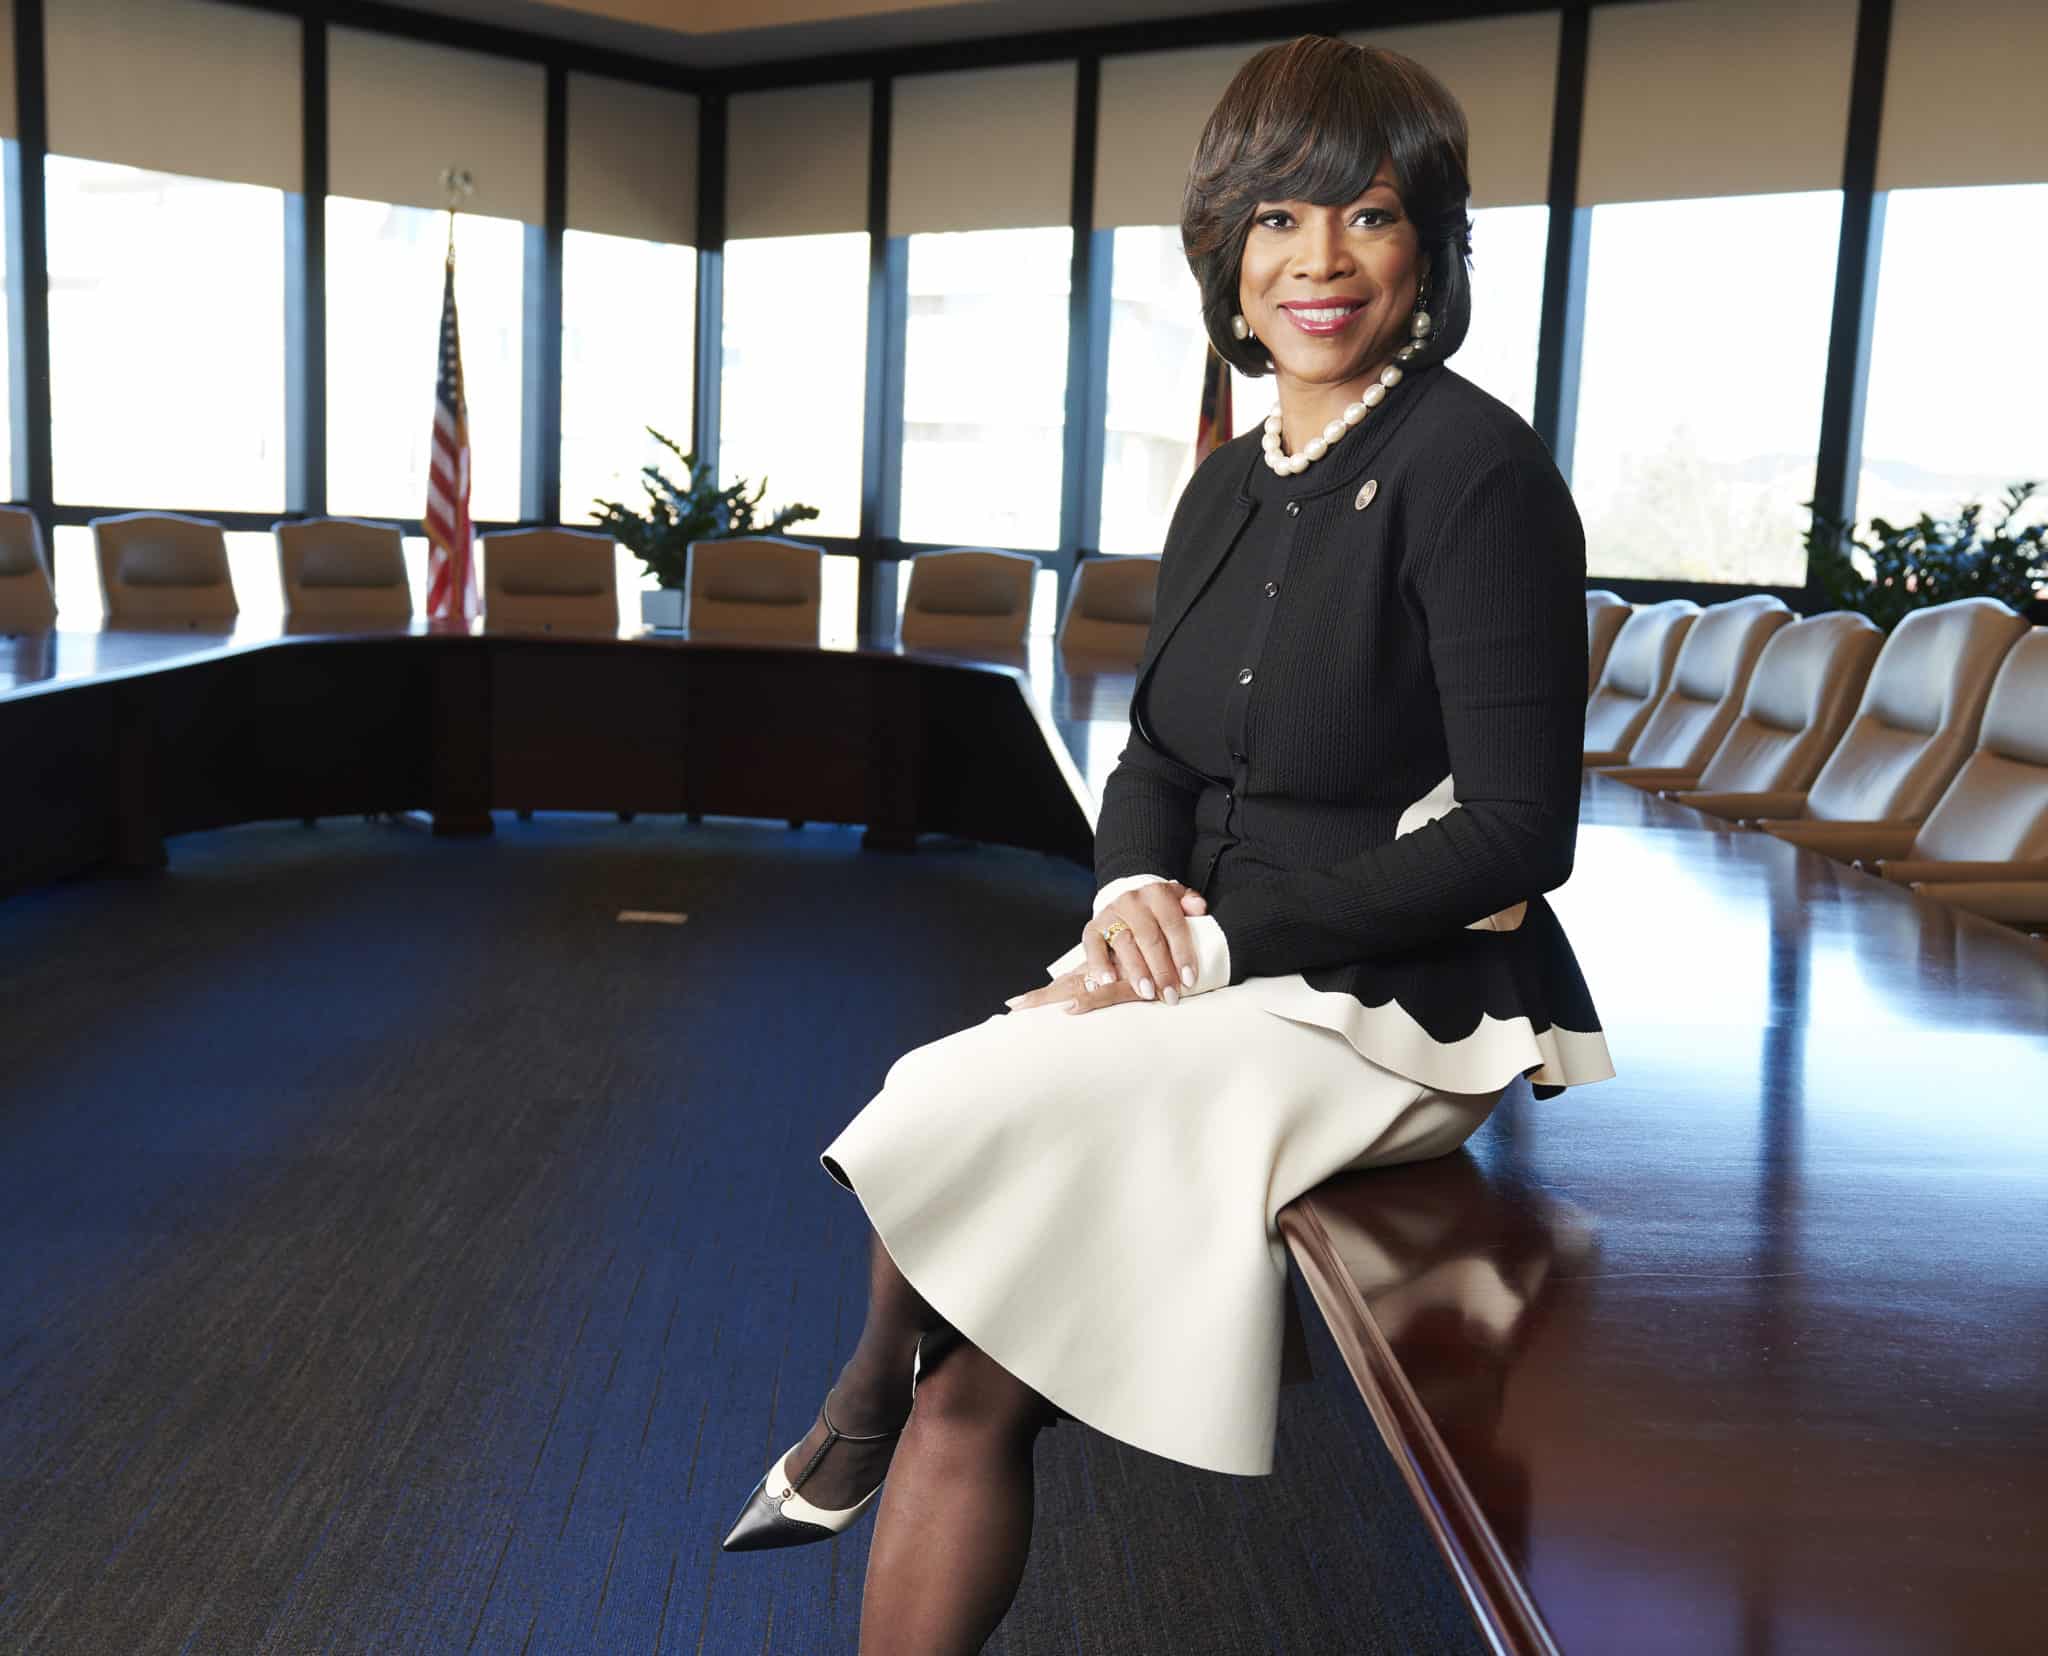 Photo of Dr. Valerie Montgomery Rice leaning against a conference table with windows and an American flag in the background